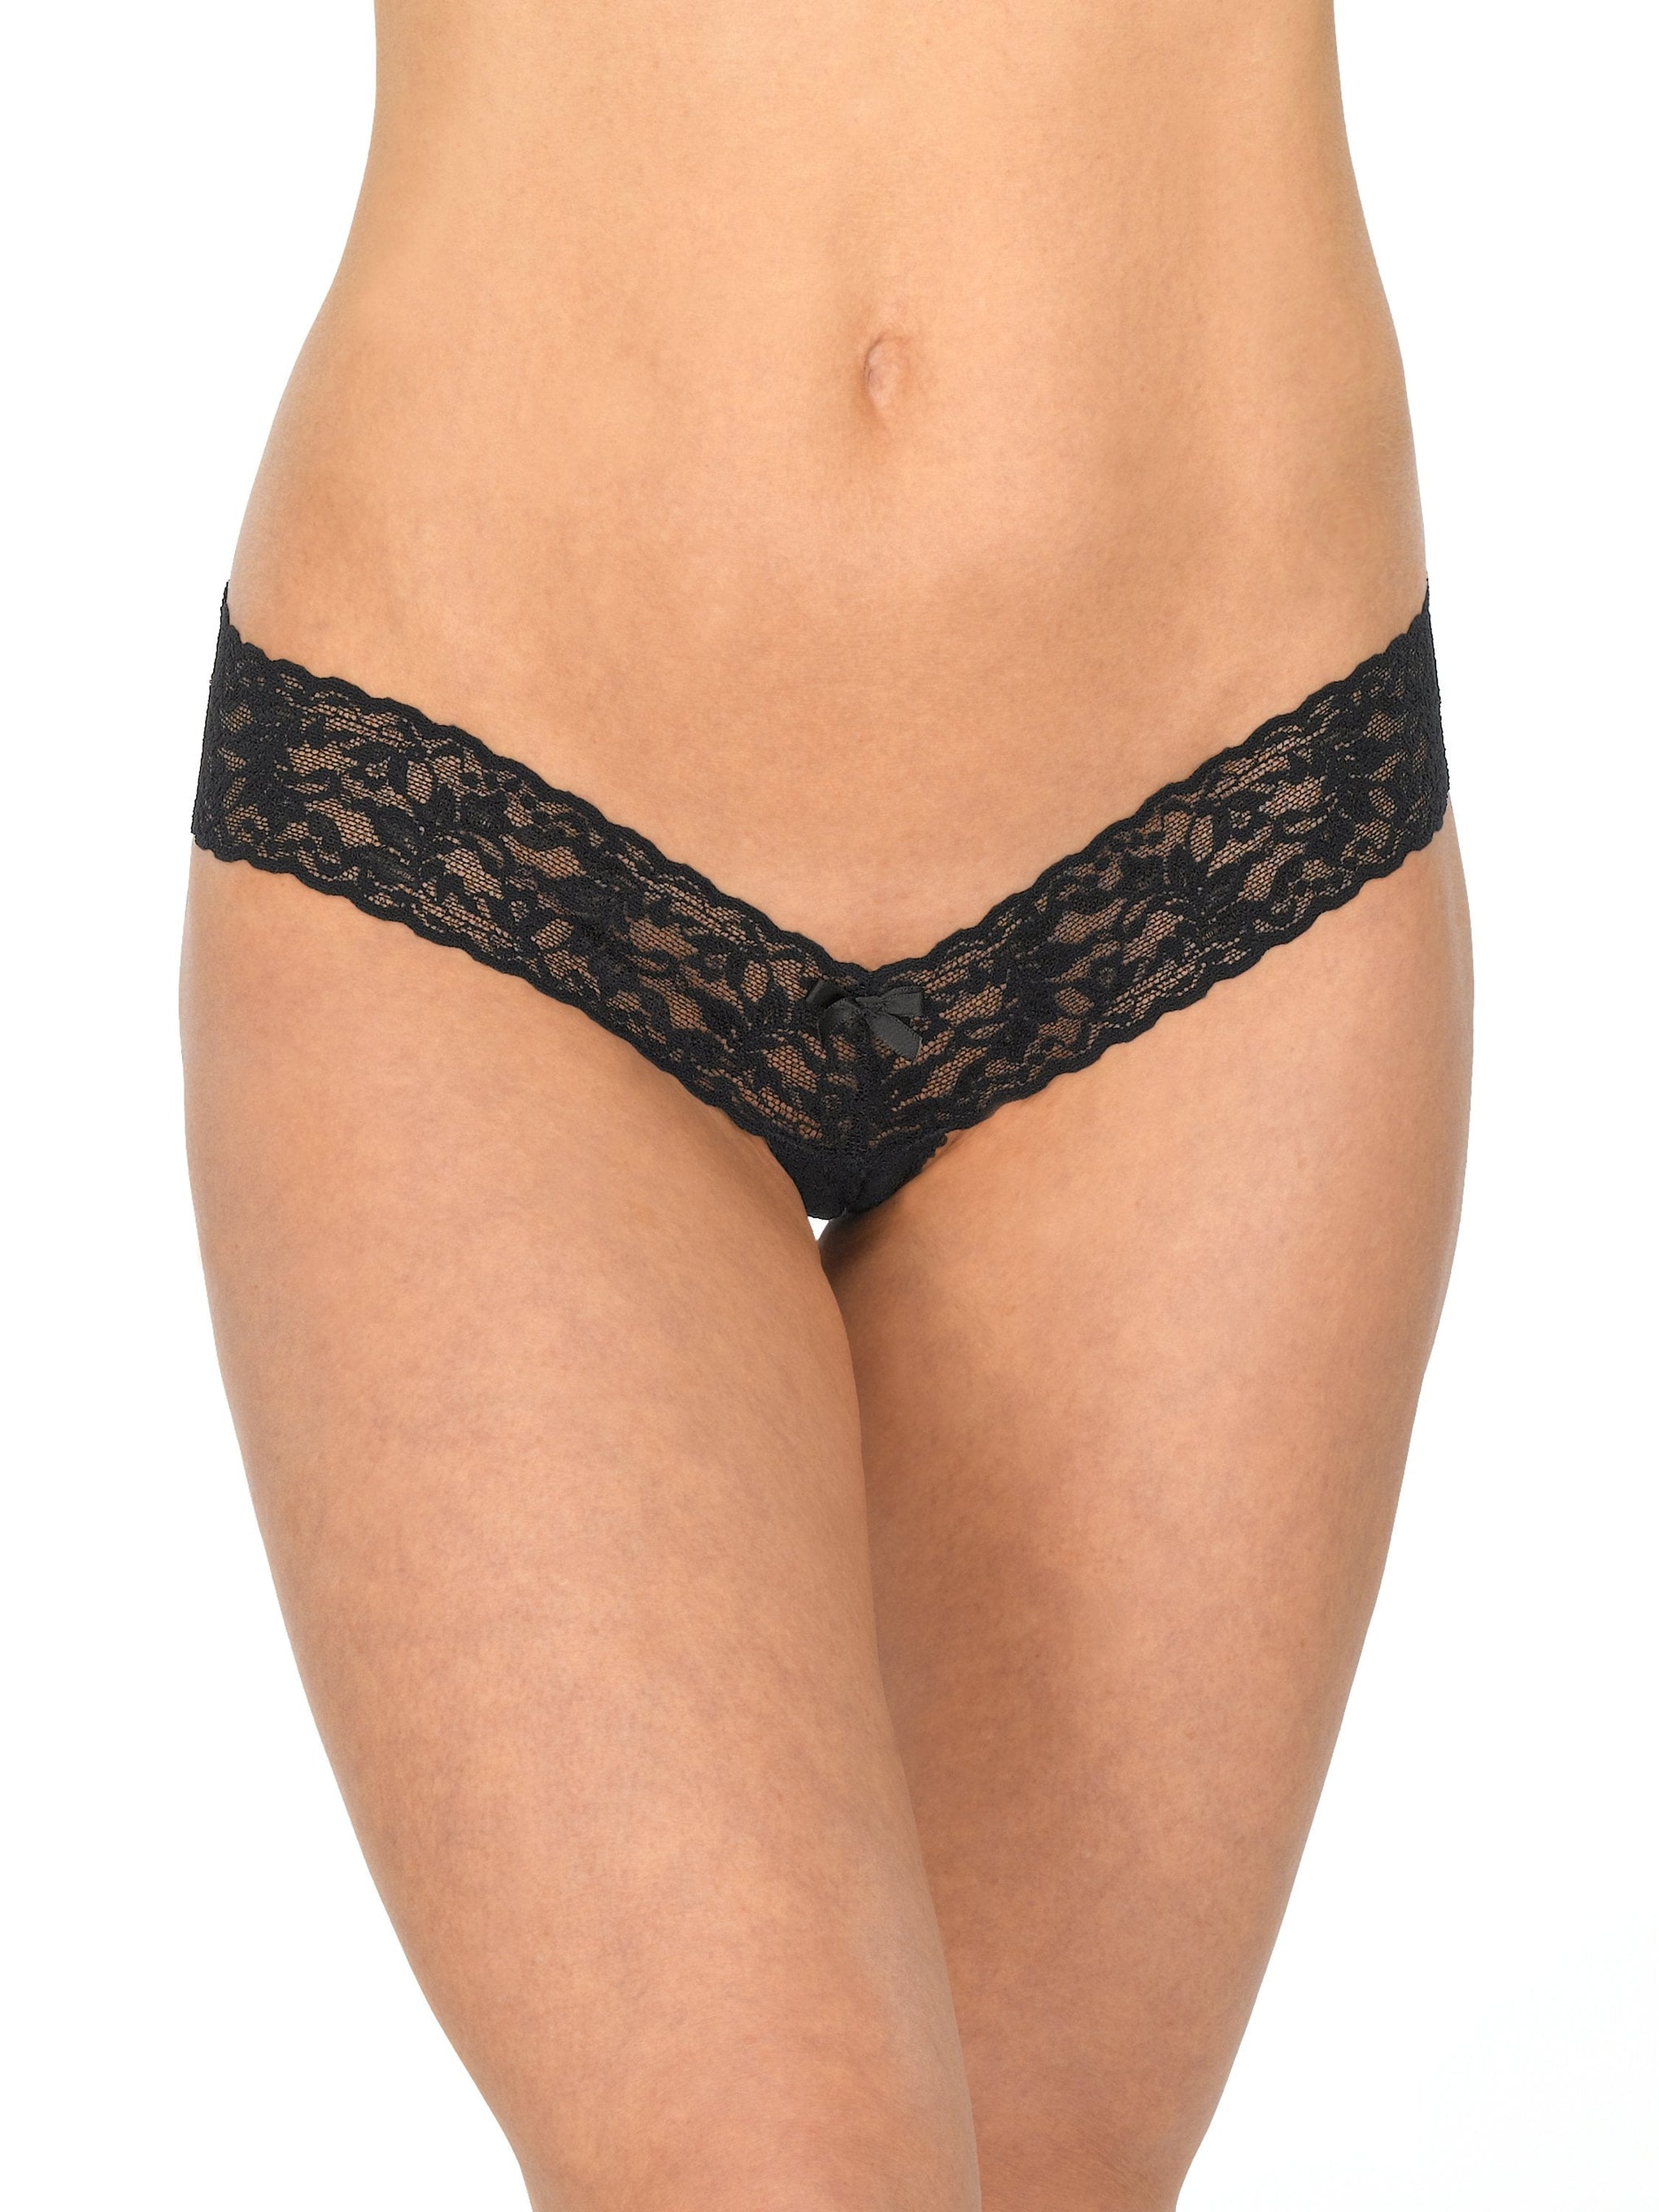 Retro Lace Crotchless Thong Black in Black